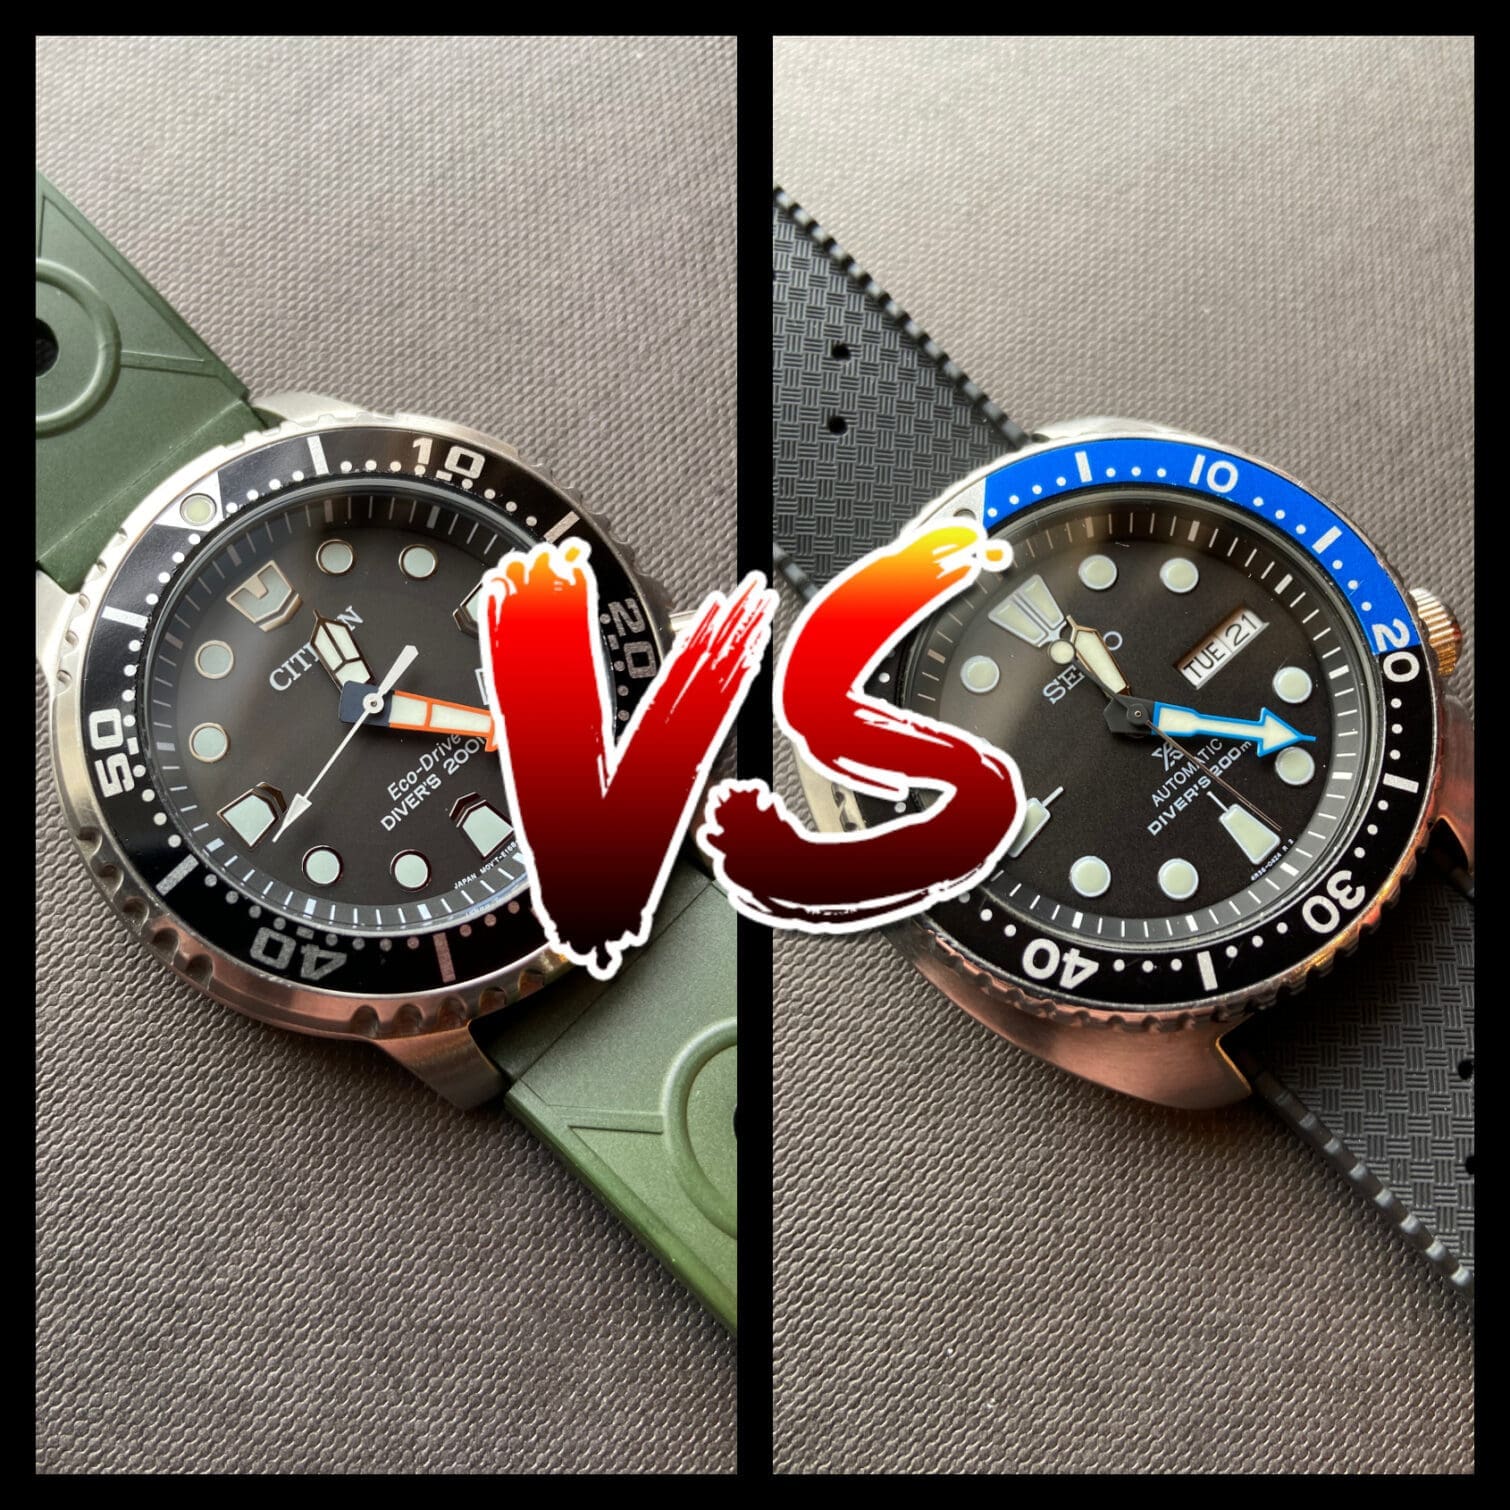 VERSUS: The Seiko Prospex Turtle takes on the Citizen Promaster Dive for entry-level underwater supremacy